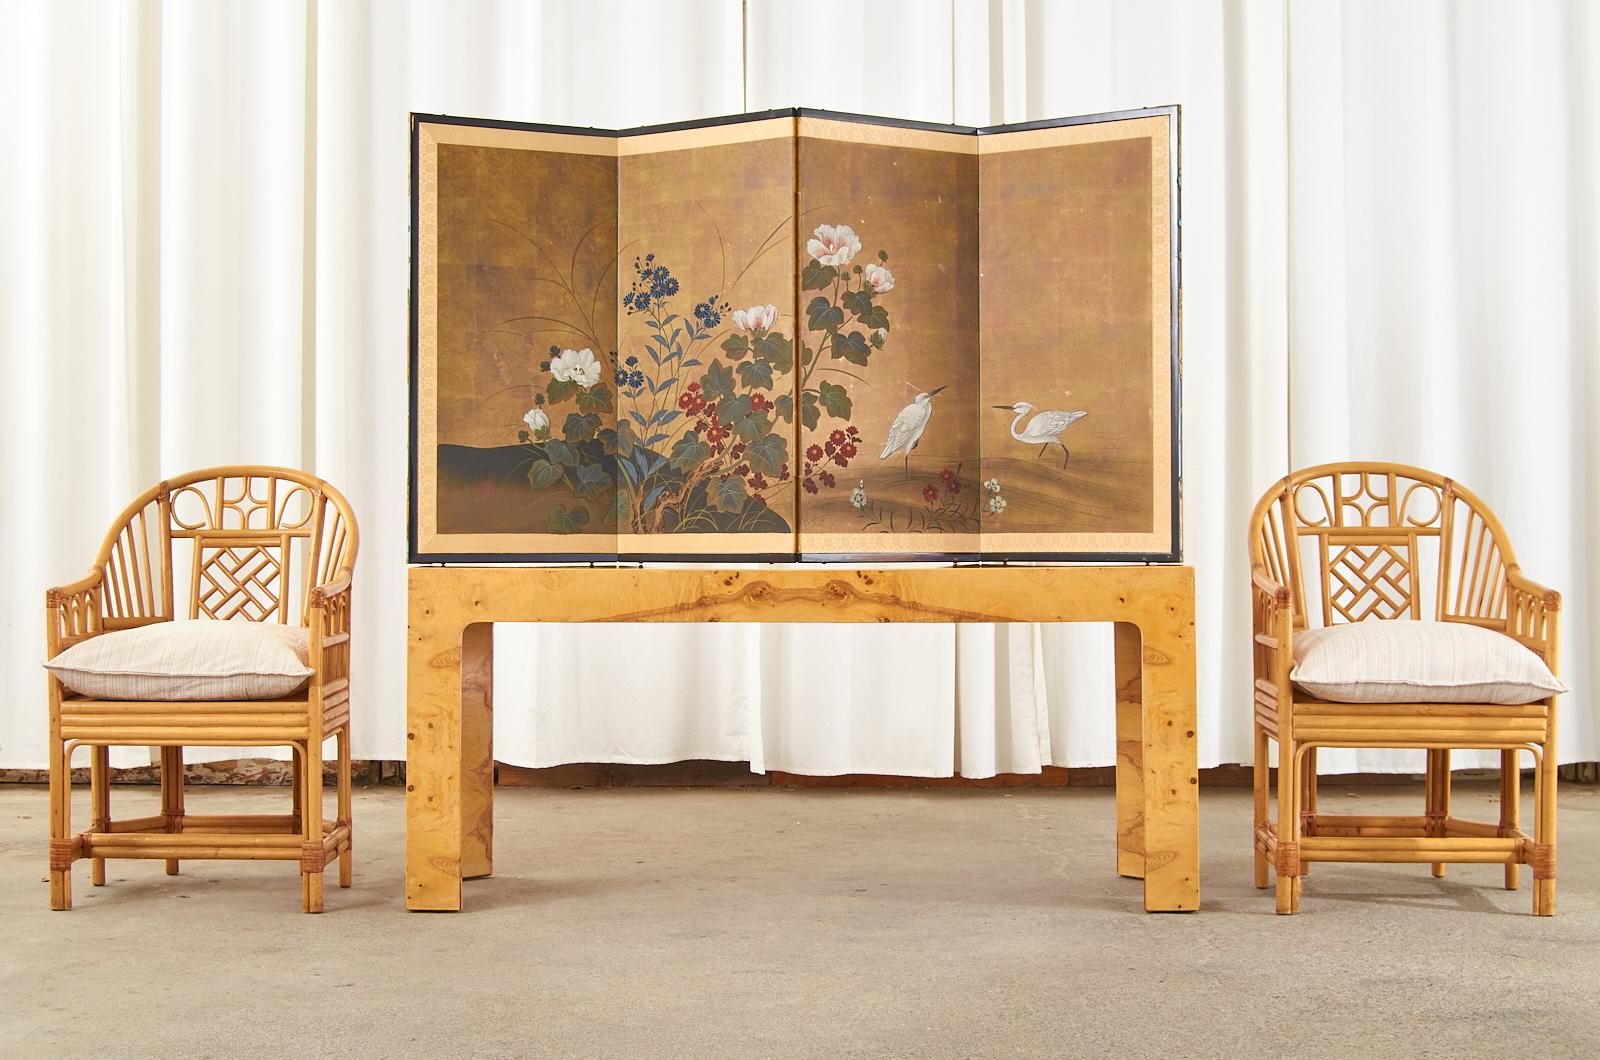 Signed Japanese Showa period four-panel folding byobu screen featuring colorful chrysanthemums and hibiscus flowers with two egrets. Ink and color pigments on gilt paper signed by artist Sankei with a seal. Set in a lacquered frame with a garden